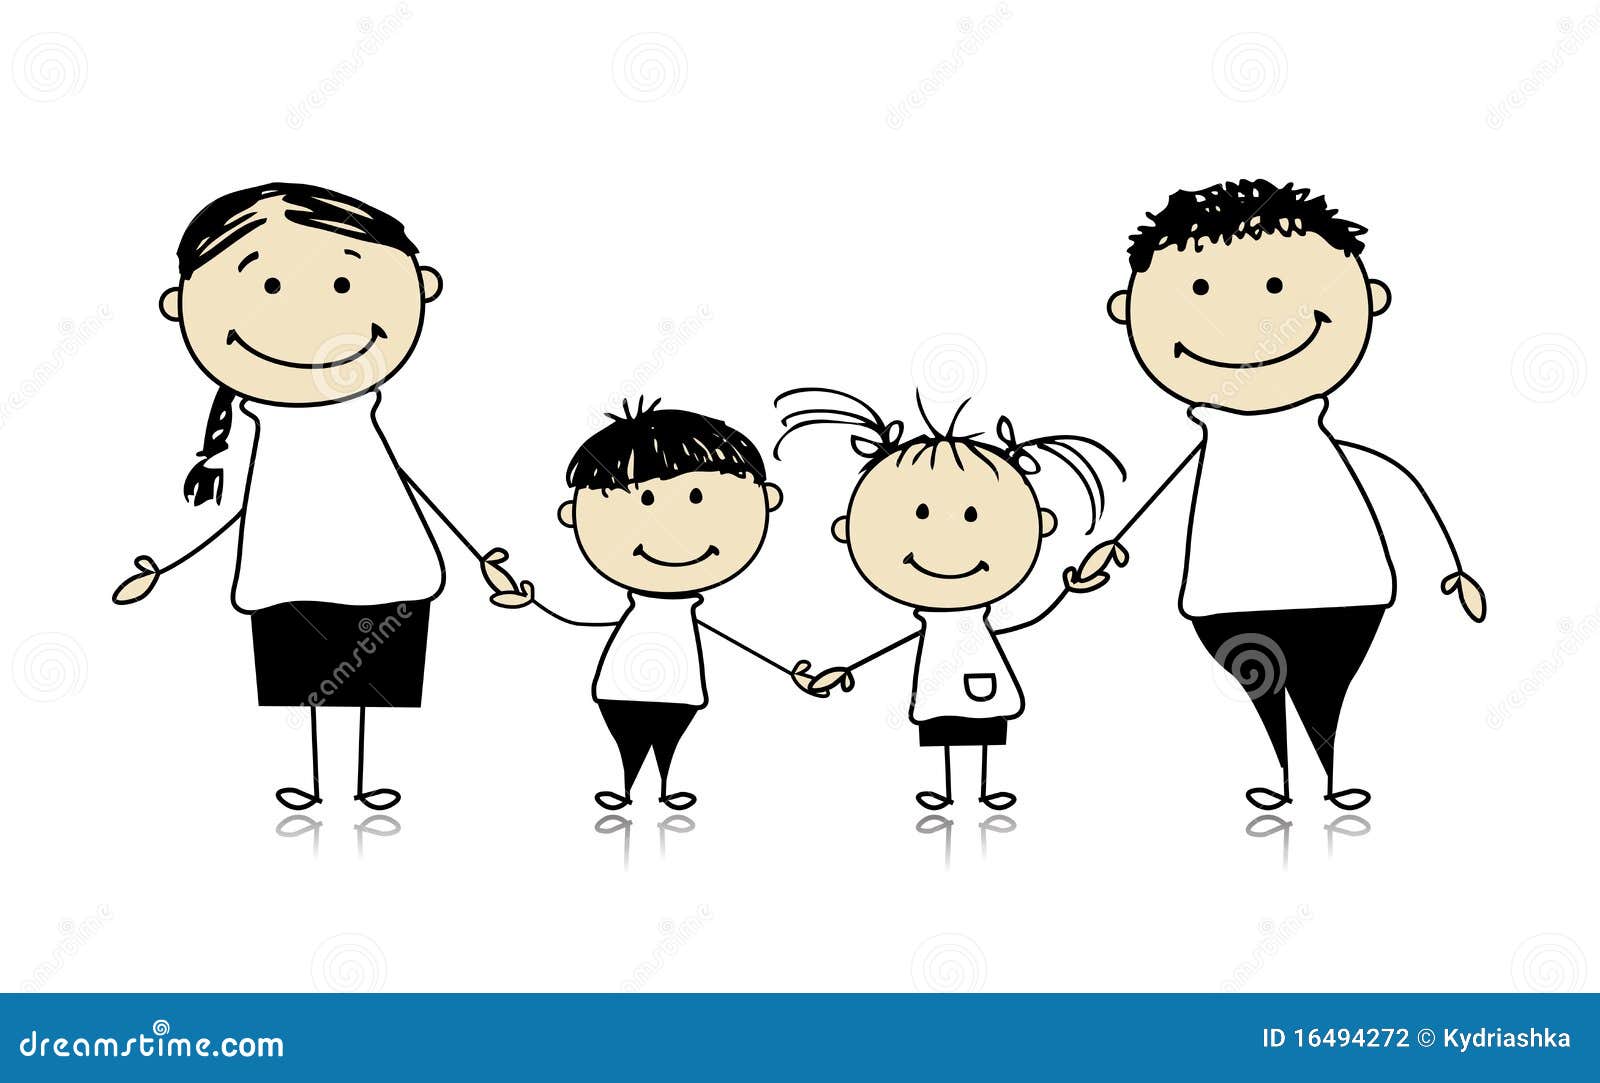 Small Family Outline Images